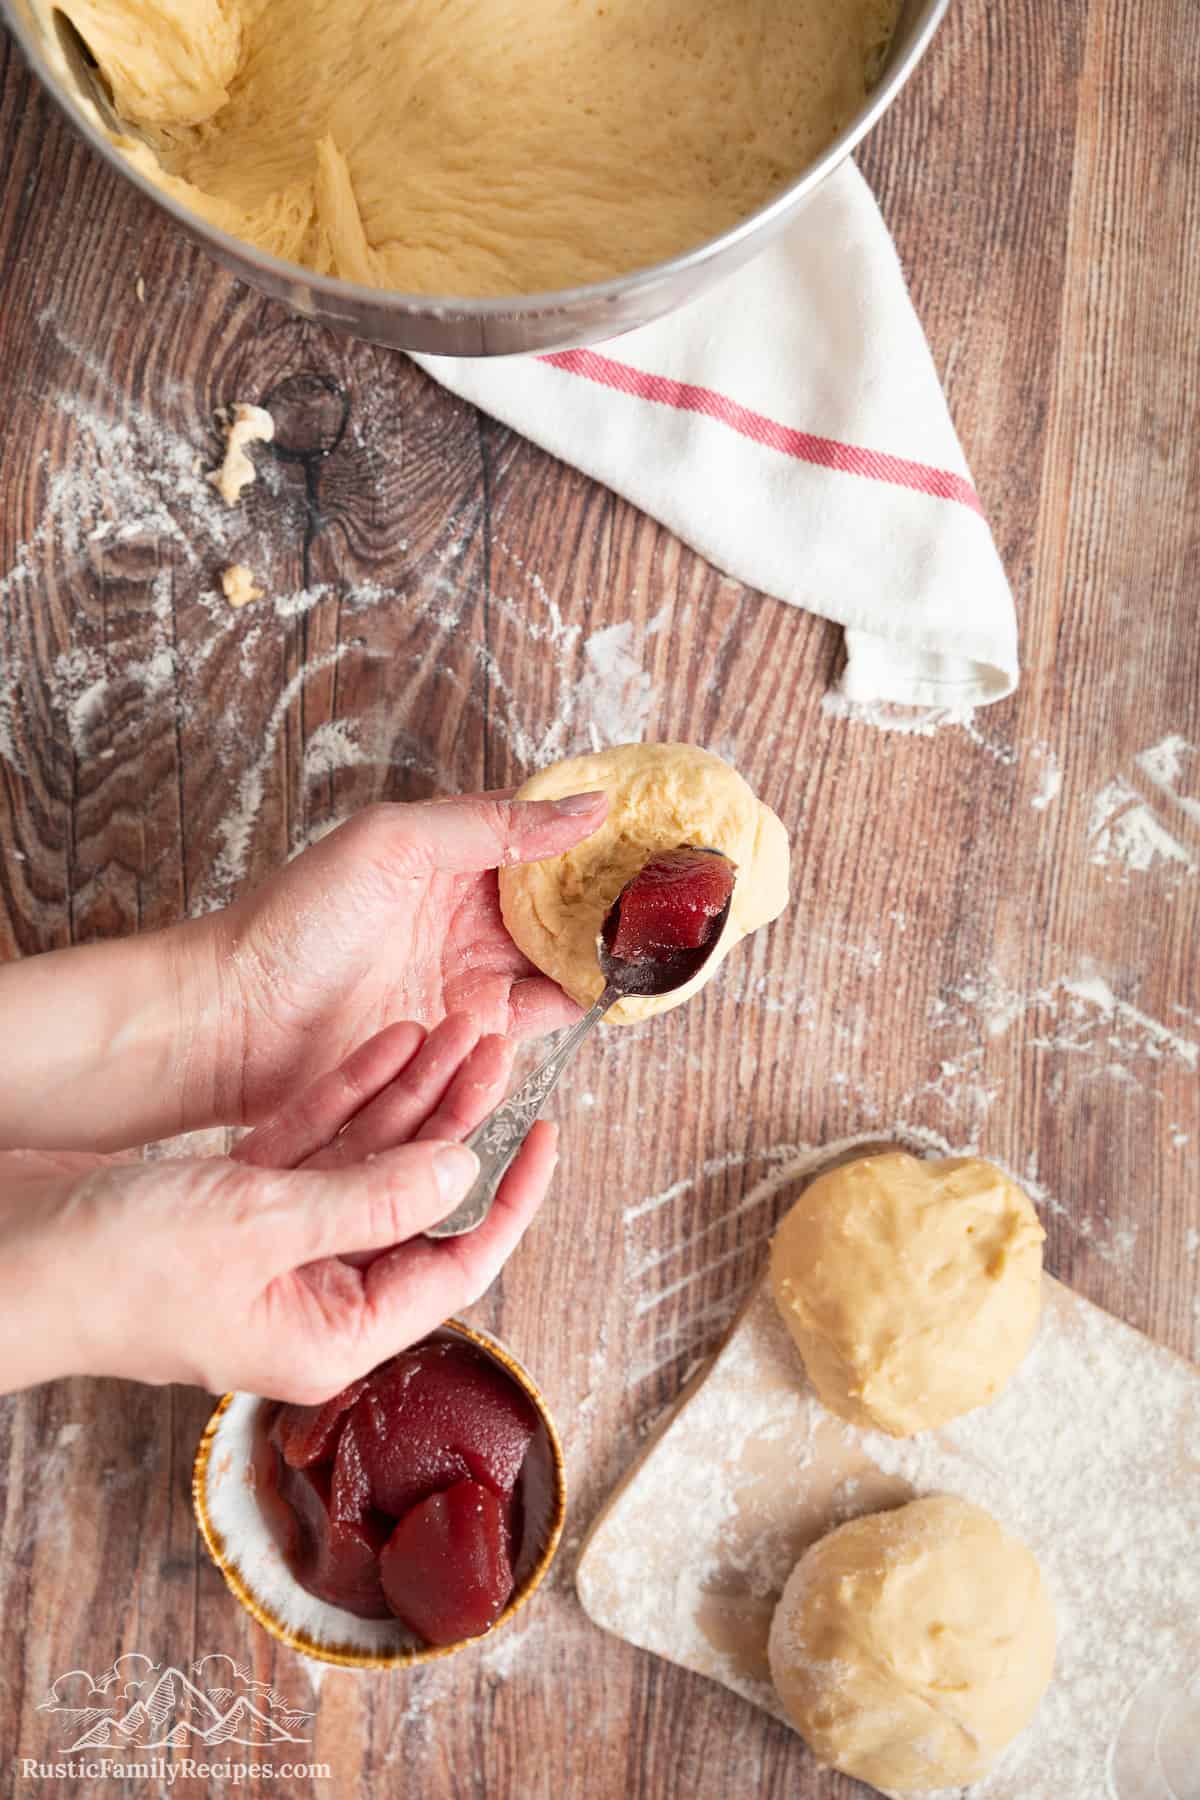 A spoonful of strawberry jam being added to the center of a ball of paczki dough